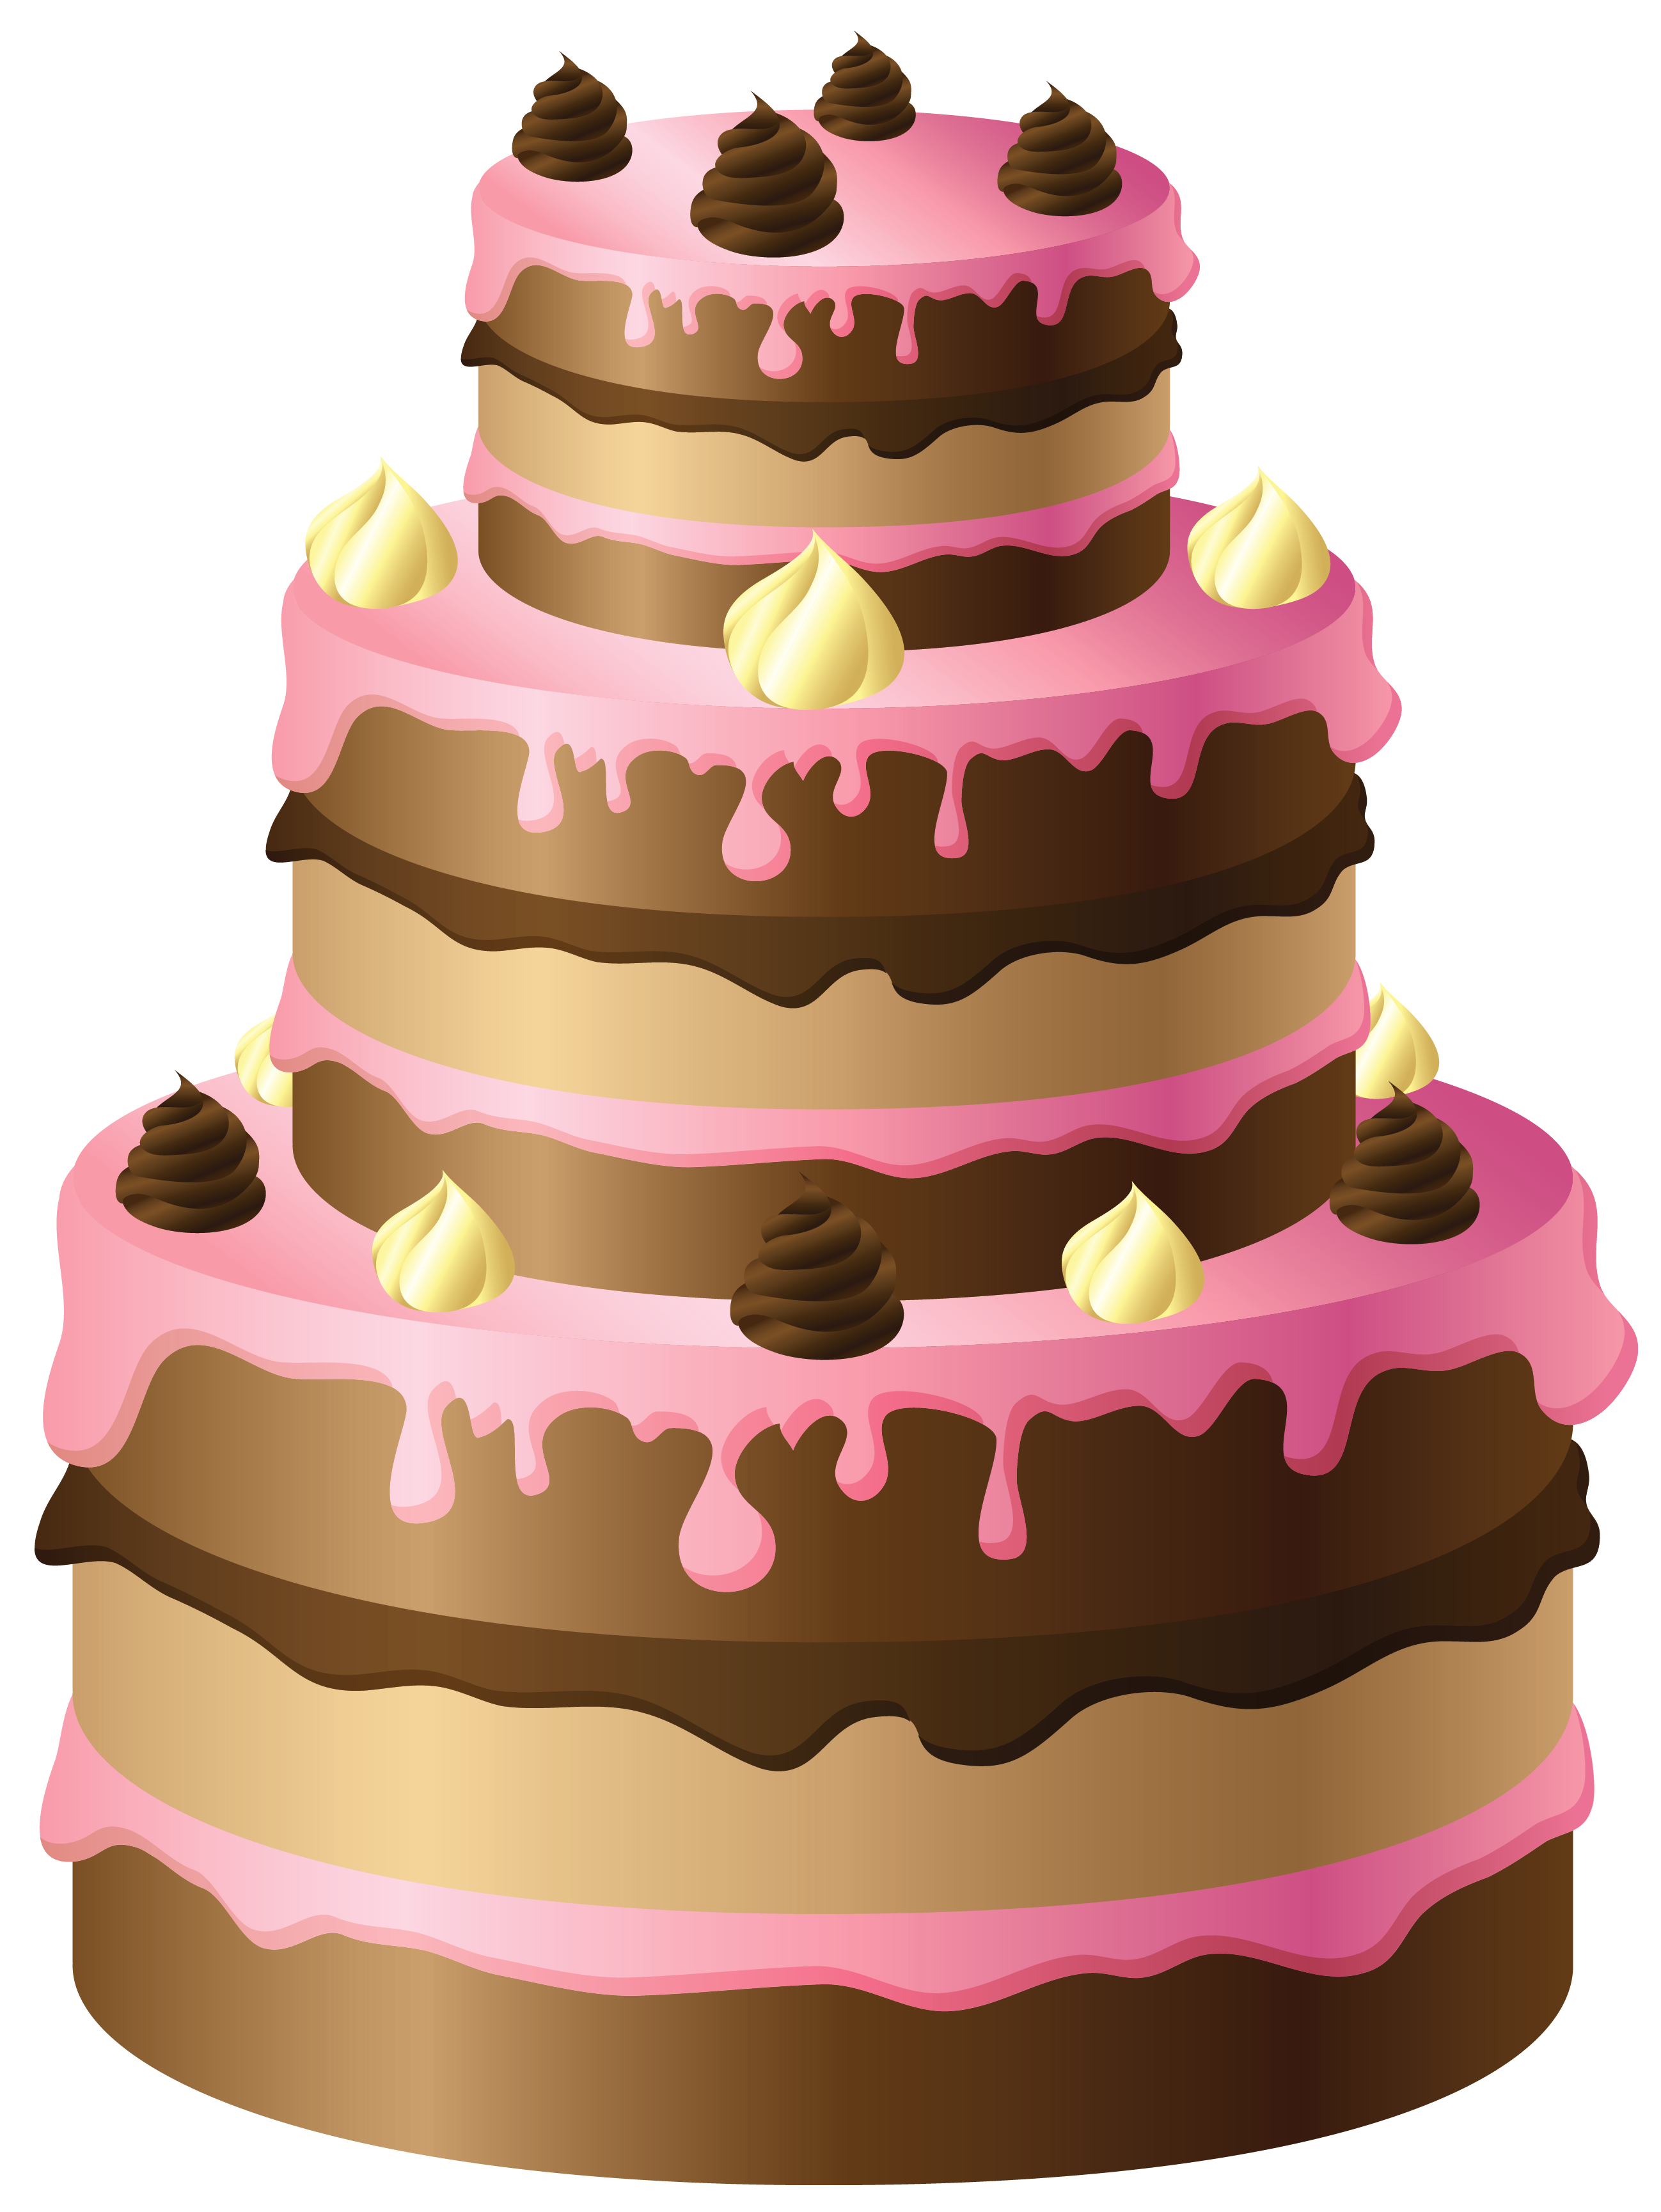 Share 74+ 3rd birthday cake png best - awesomeenglish.edu.vn